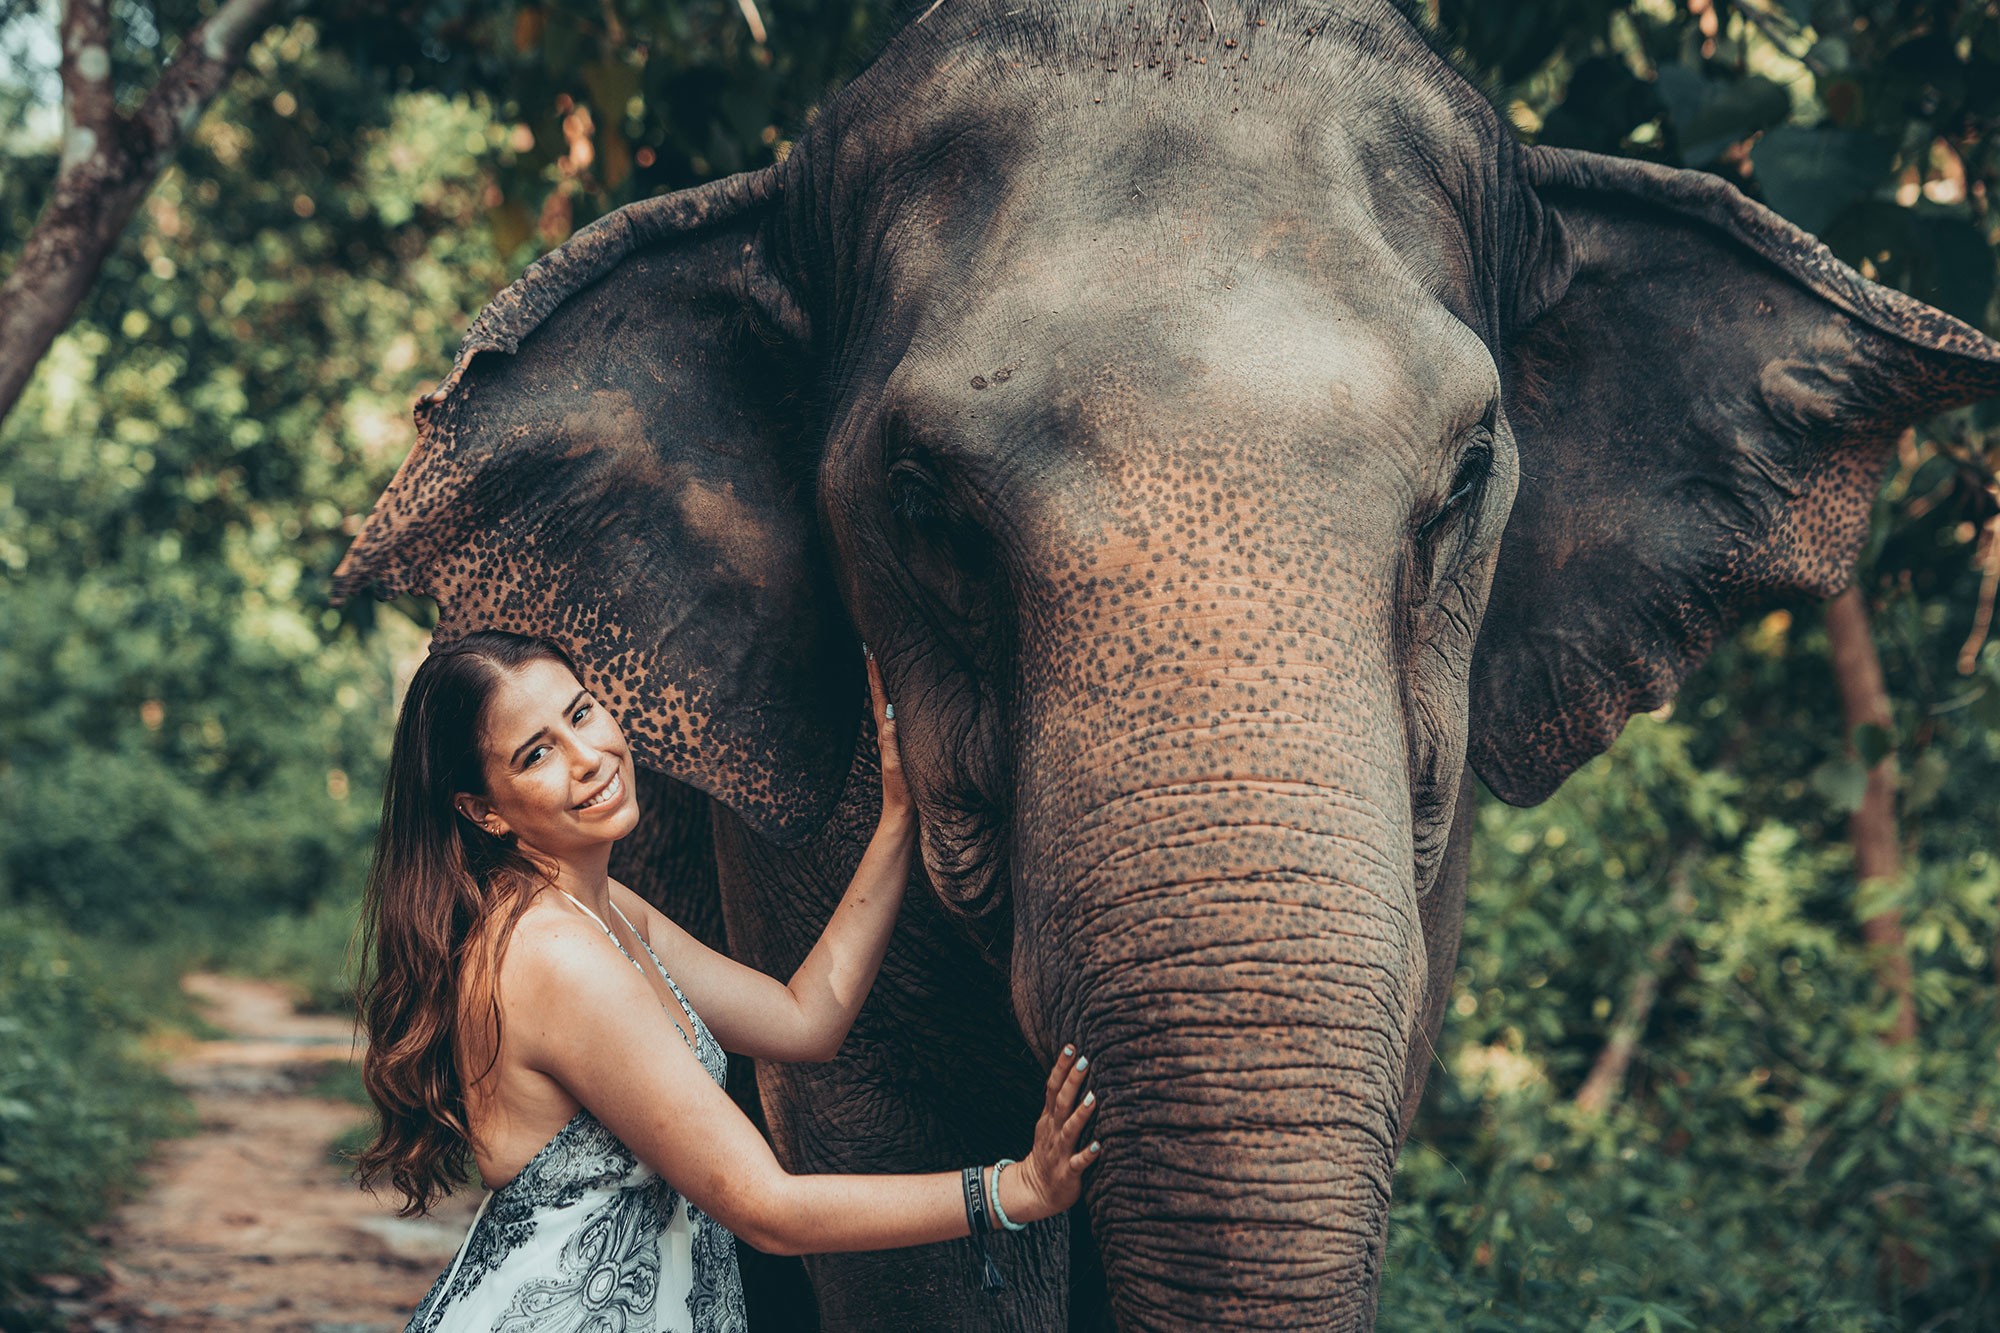 Full day elephant photo package - Chiang Mai